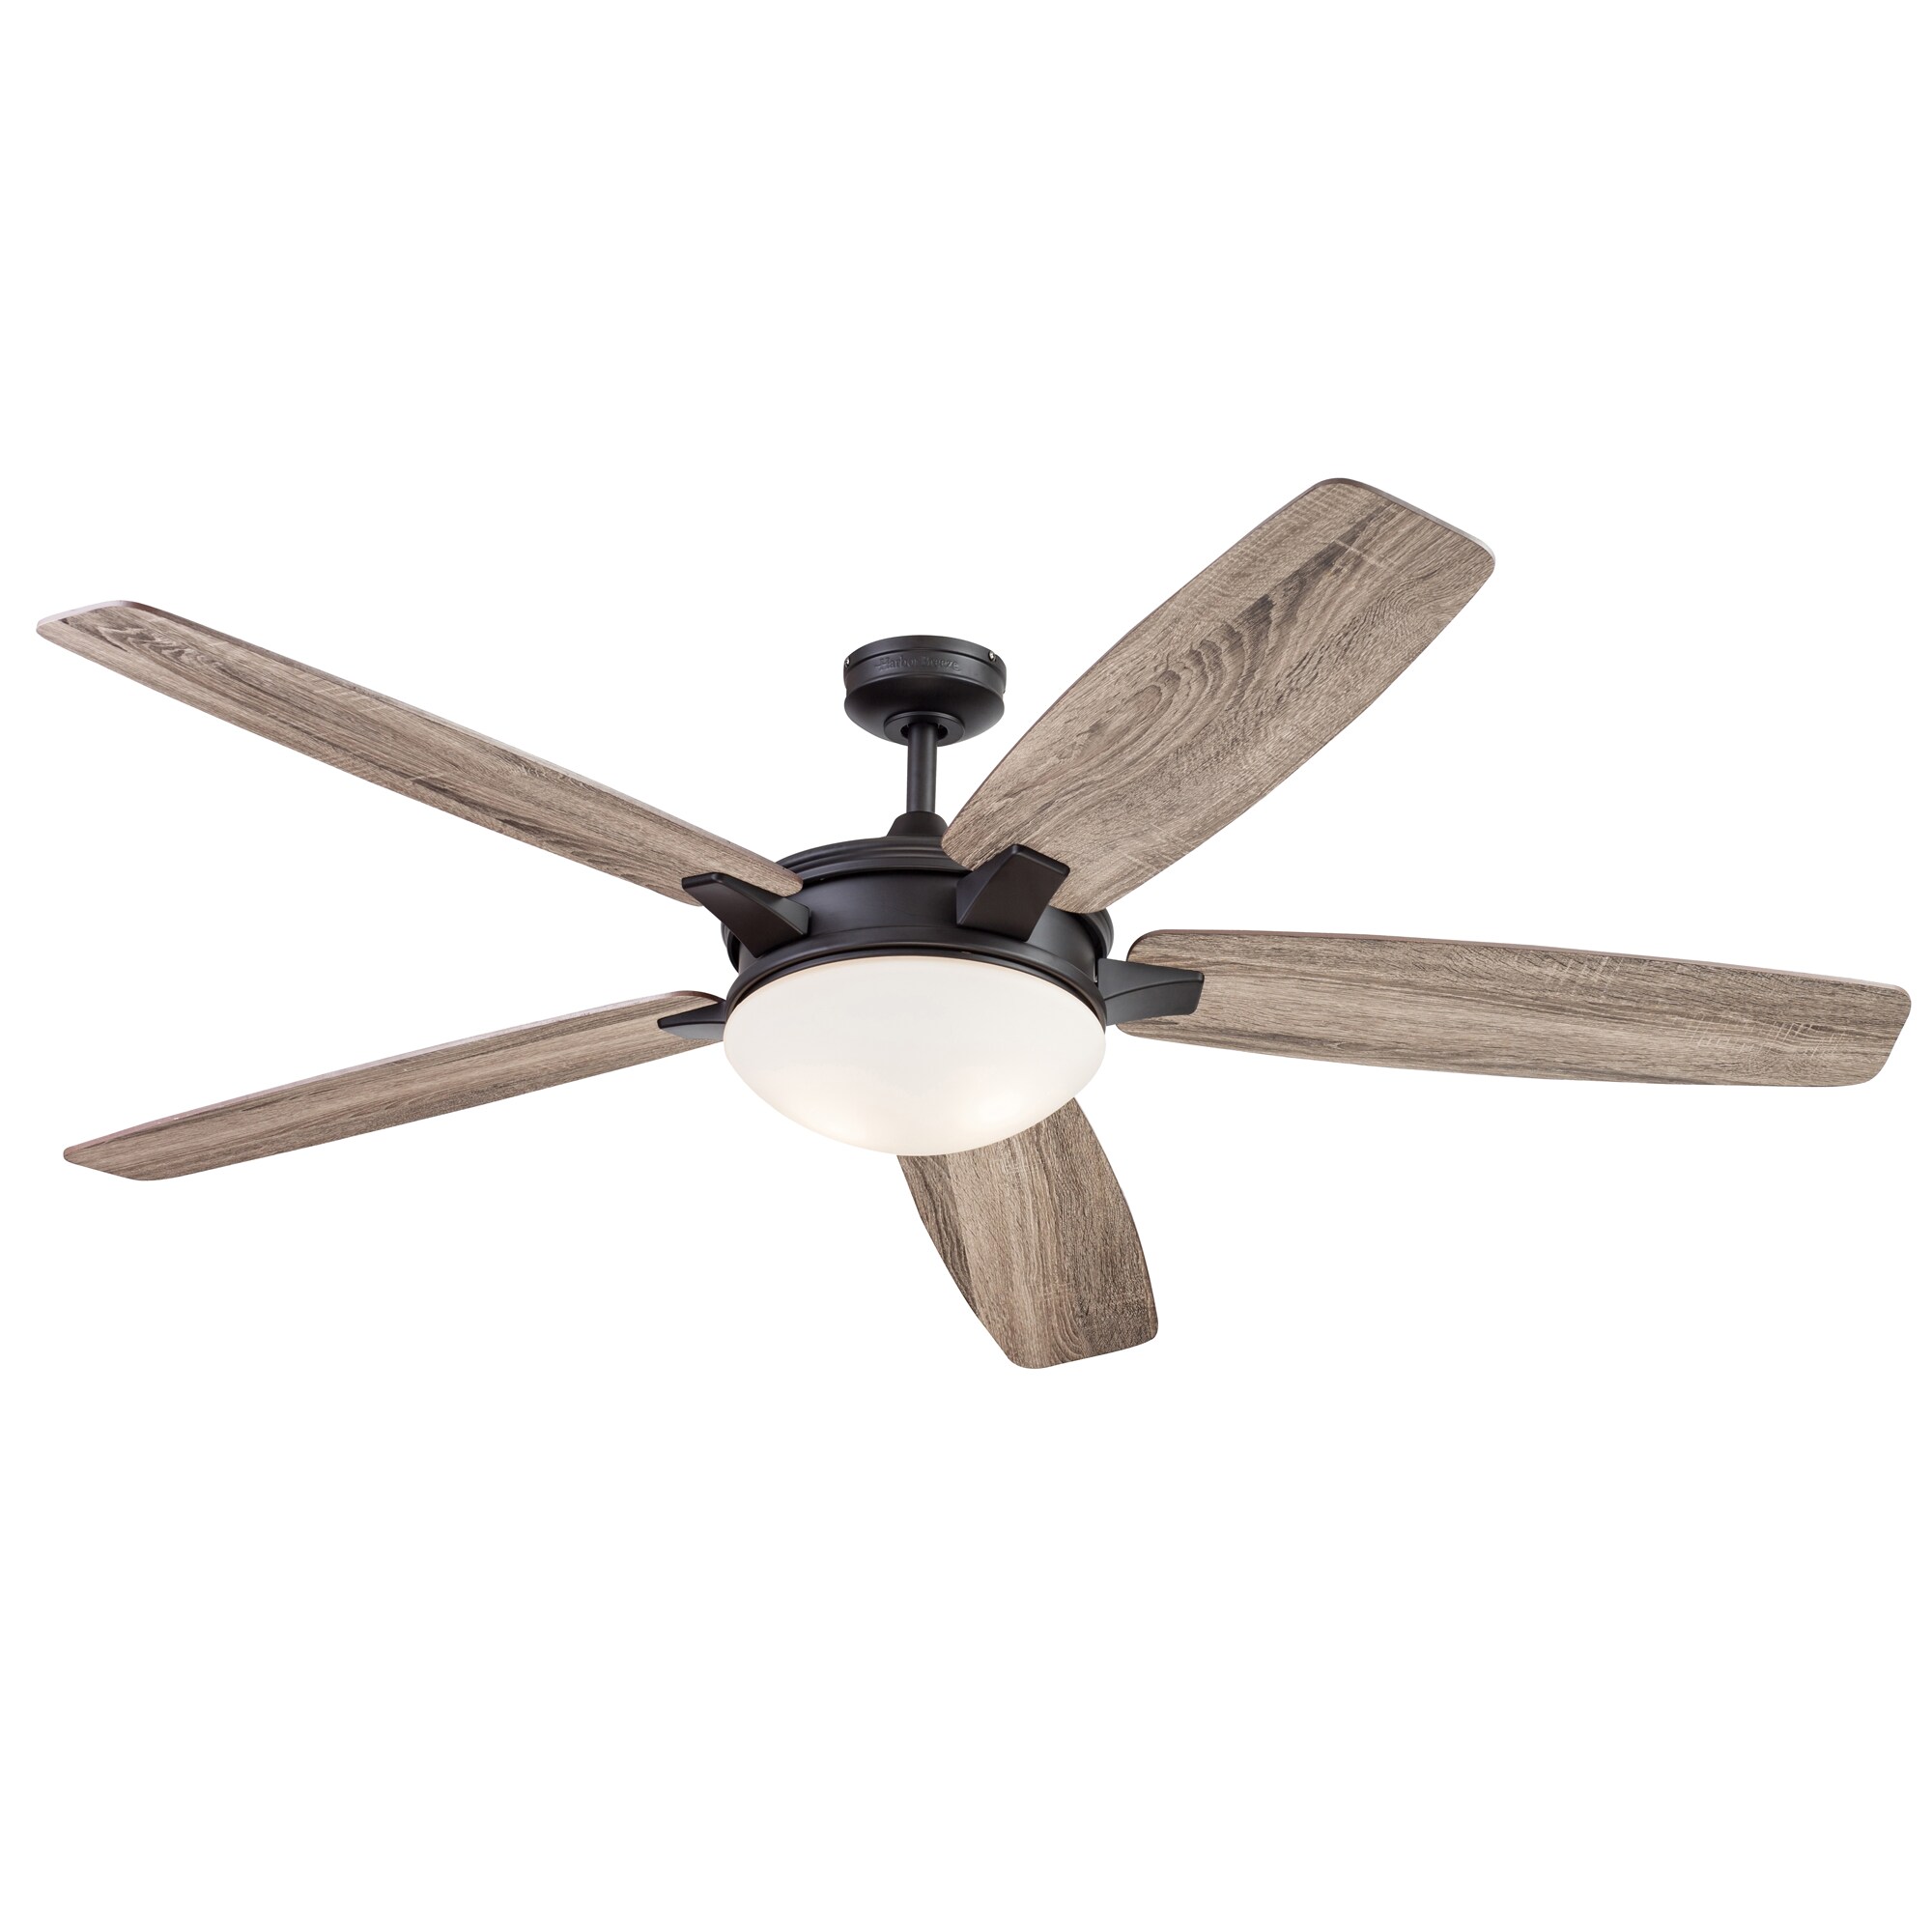 Harbor Breeze Hydra 70" Indoor Ceiling Fan with Light & Remote Control Brushed Nickel for sale online 